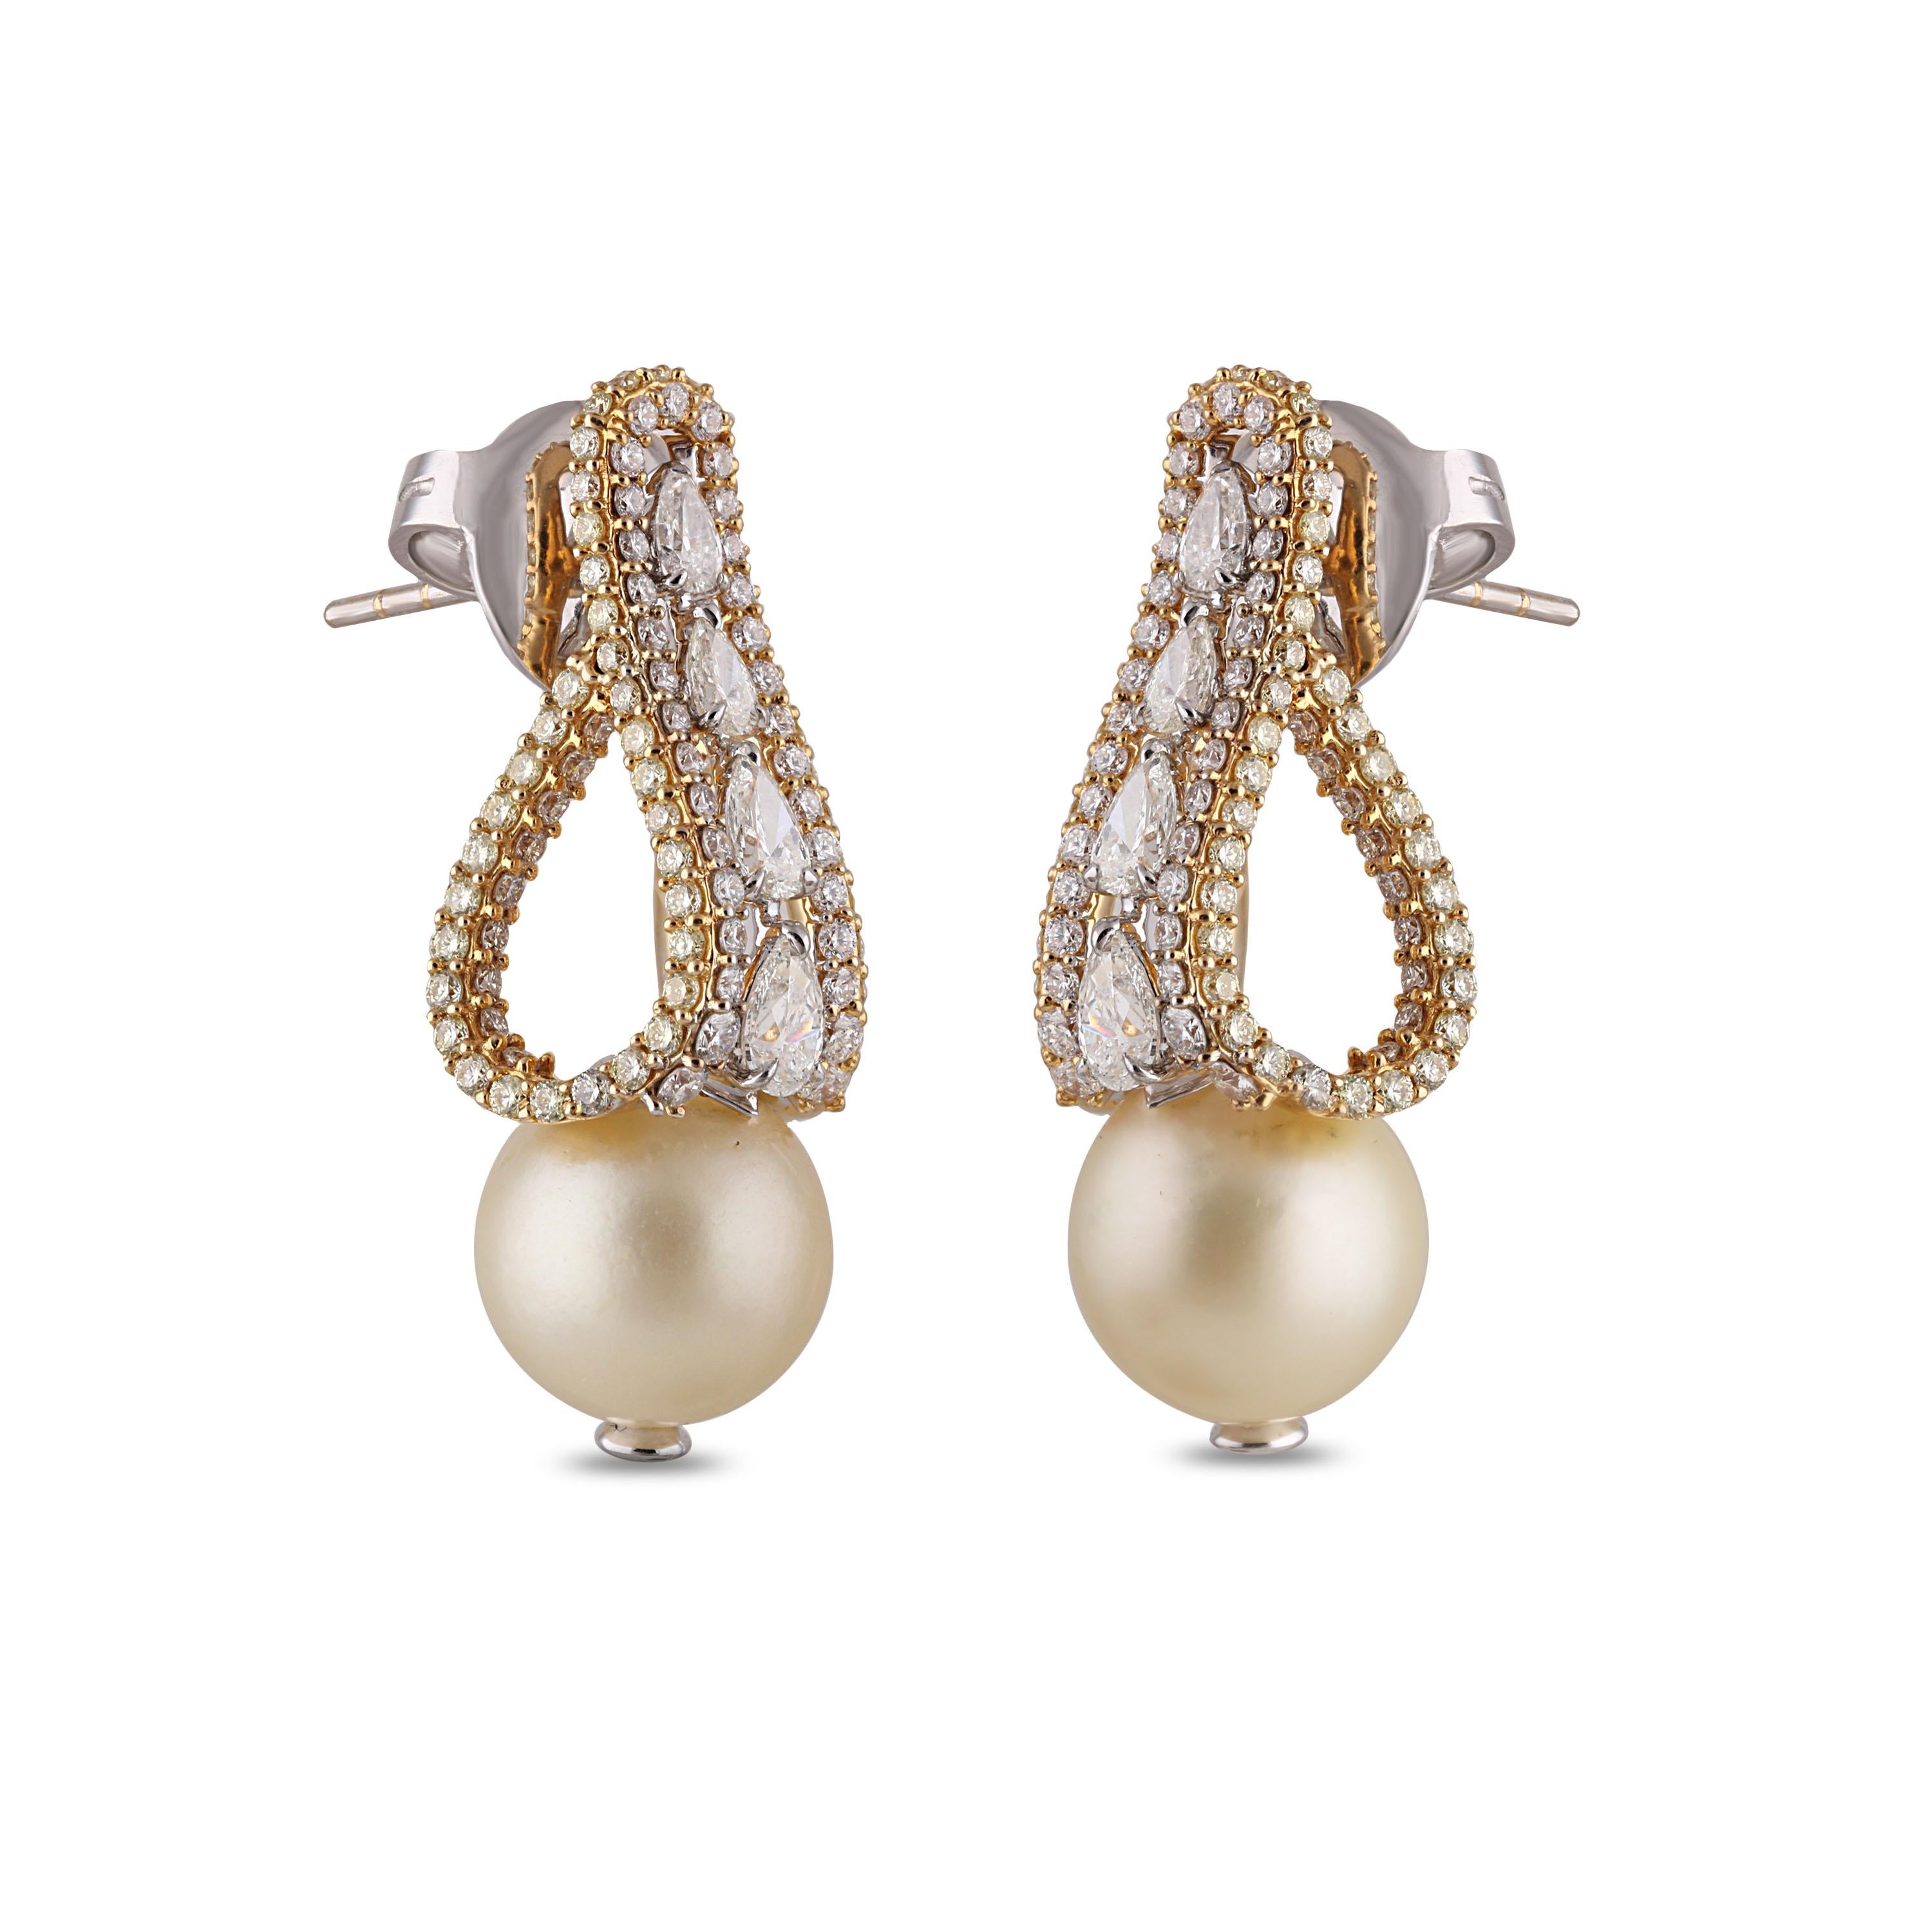 Studio Rêves Ribbon Fold Diamond and South Sea Pearls Stud Earrings in 18K Gold For Sale 1